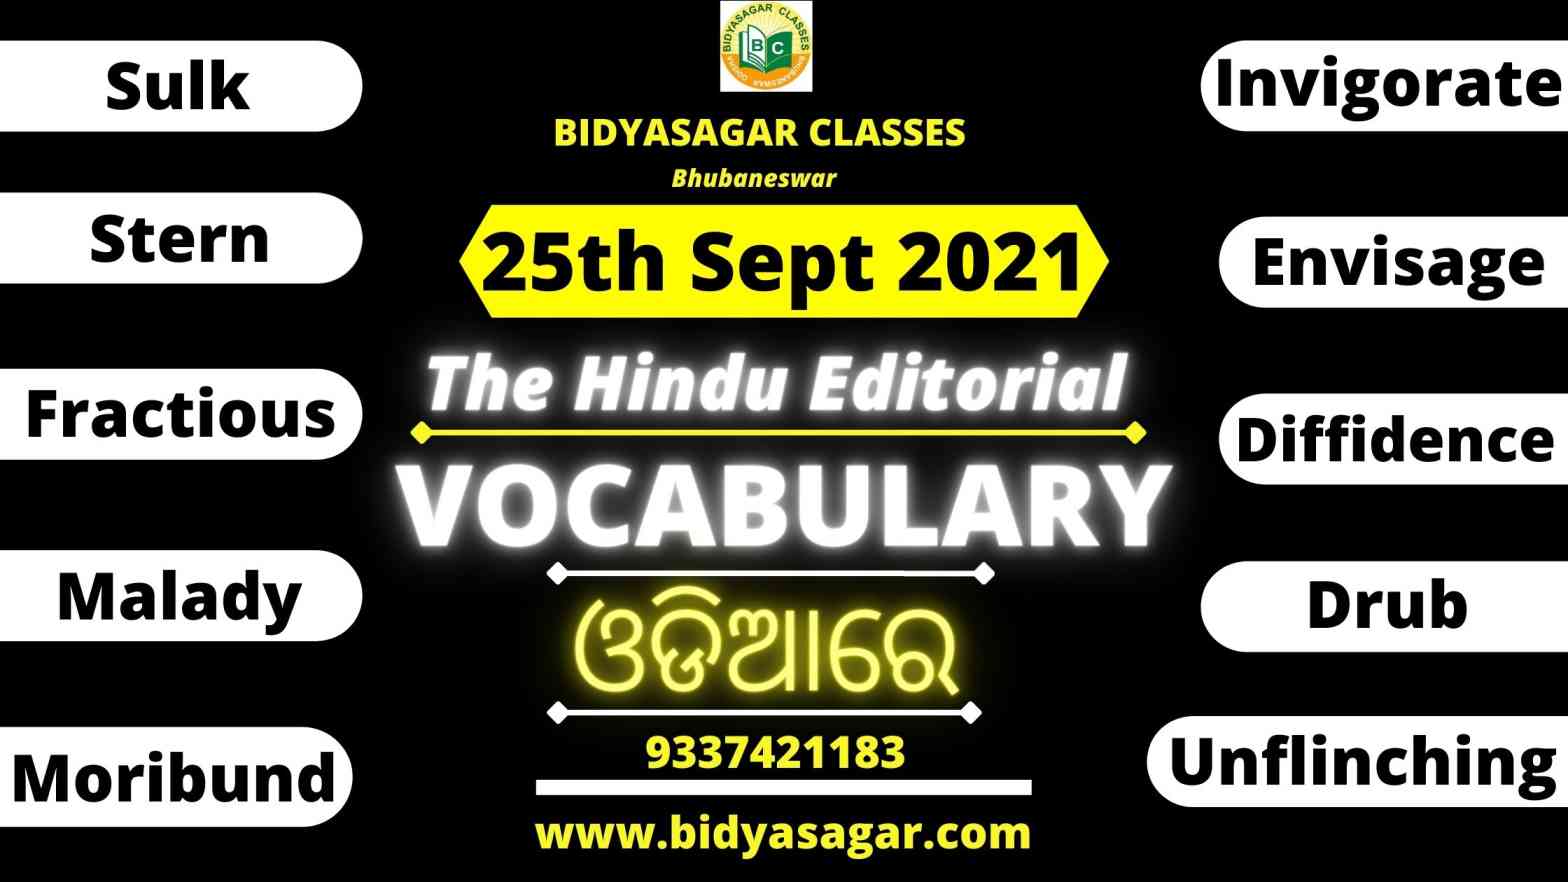 The Hindu Editorial Vocabulary of 25th September 2021